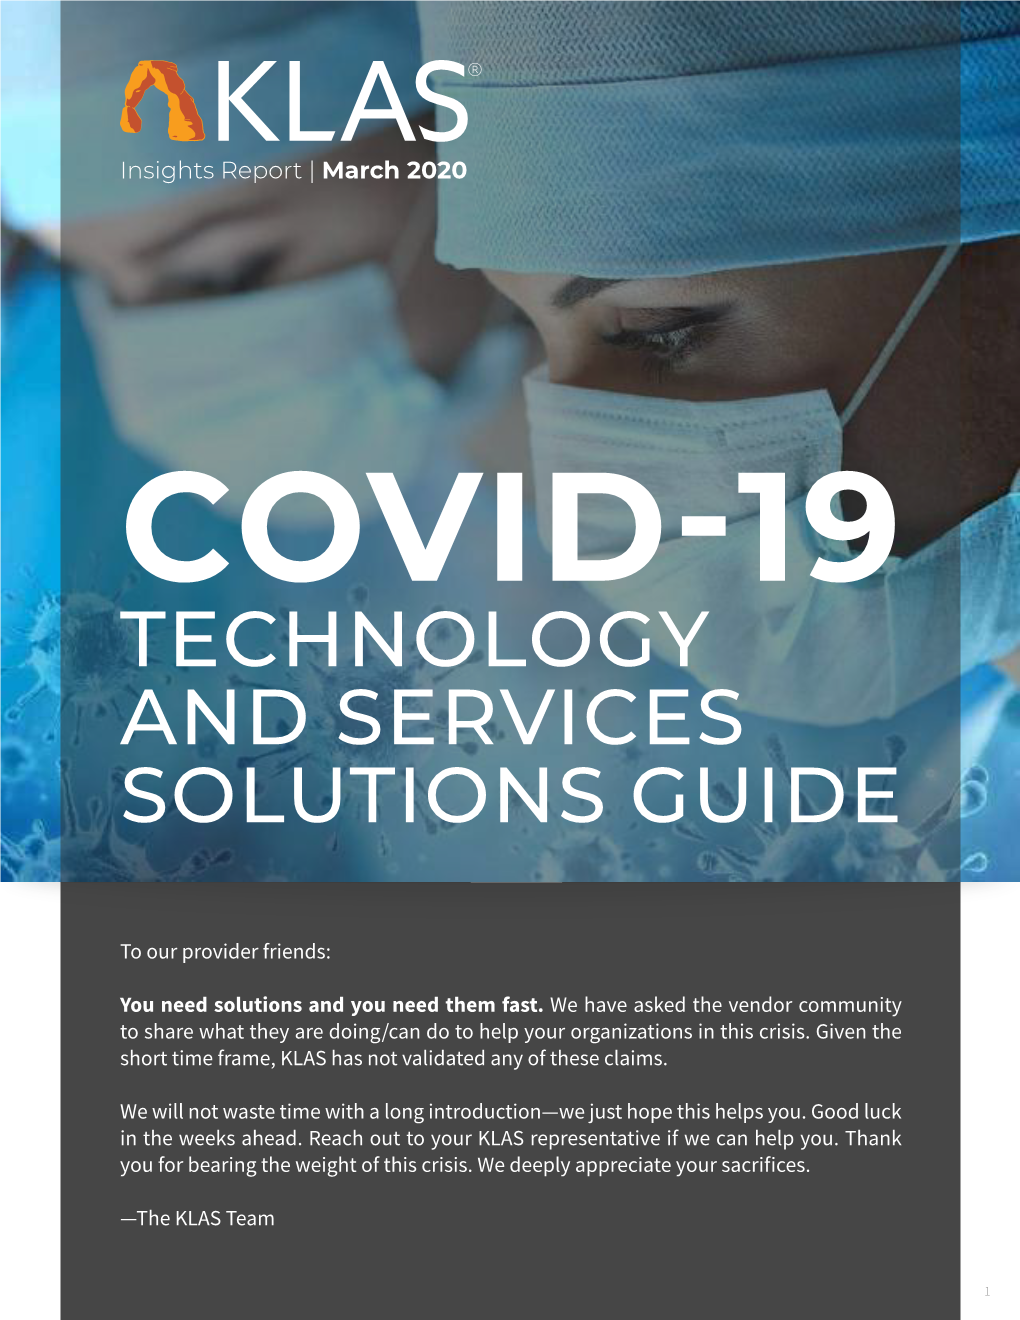 Covid-19 Technology and Services Solutions Guide